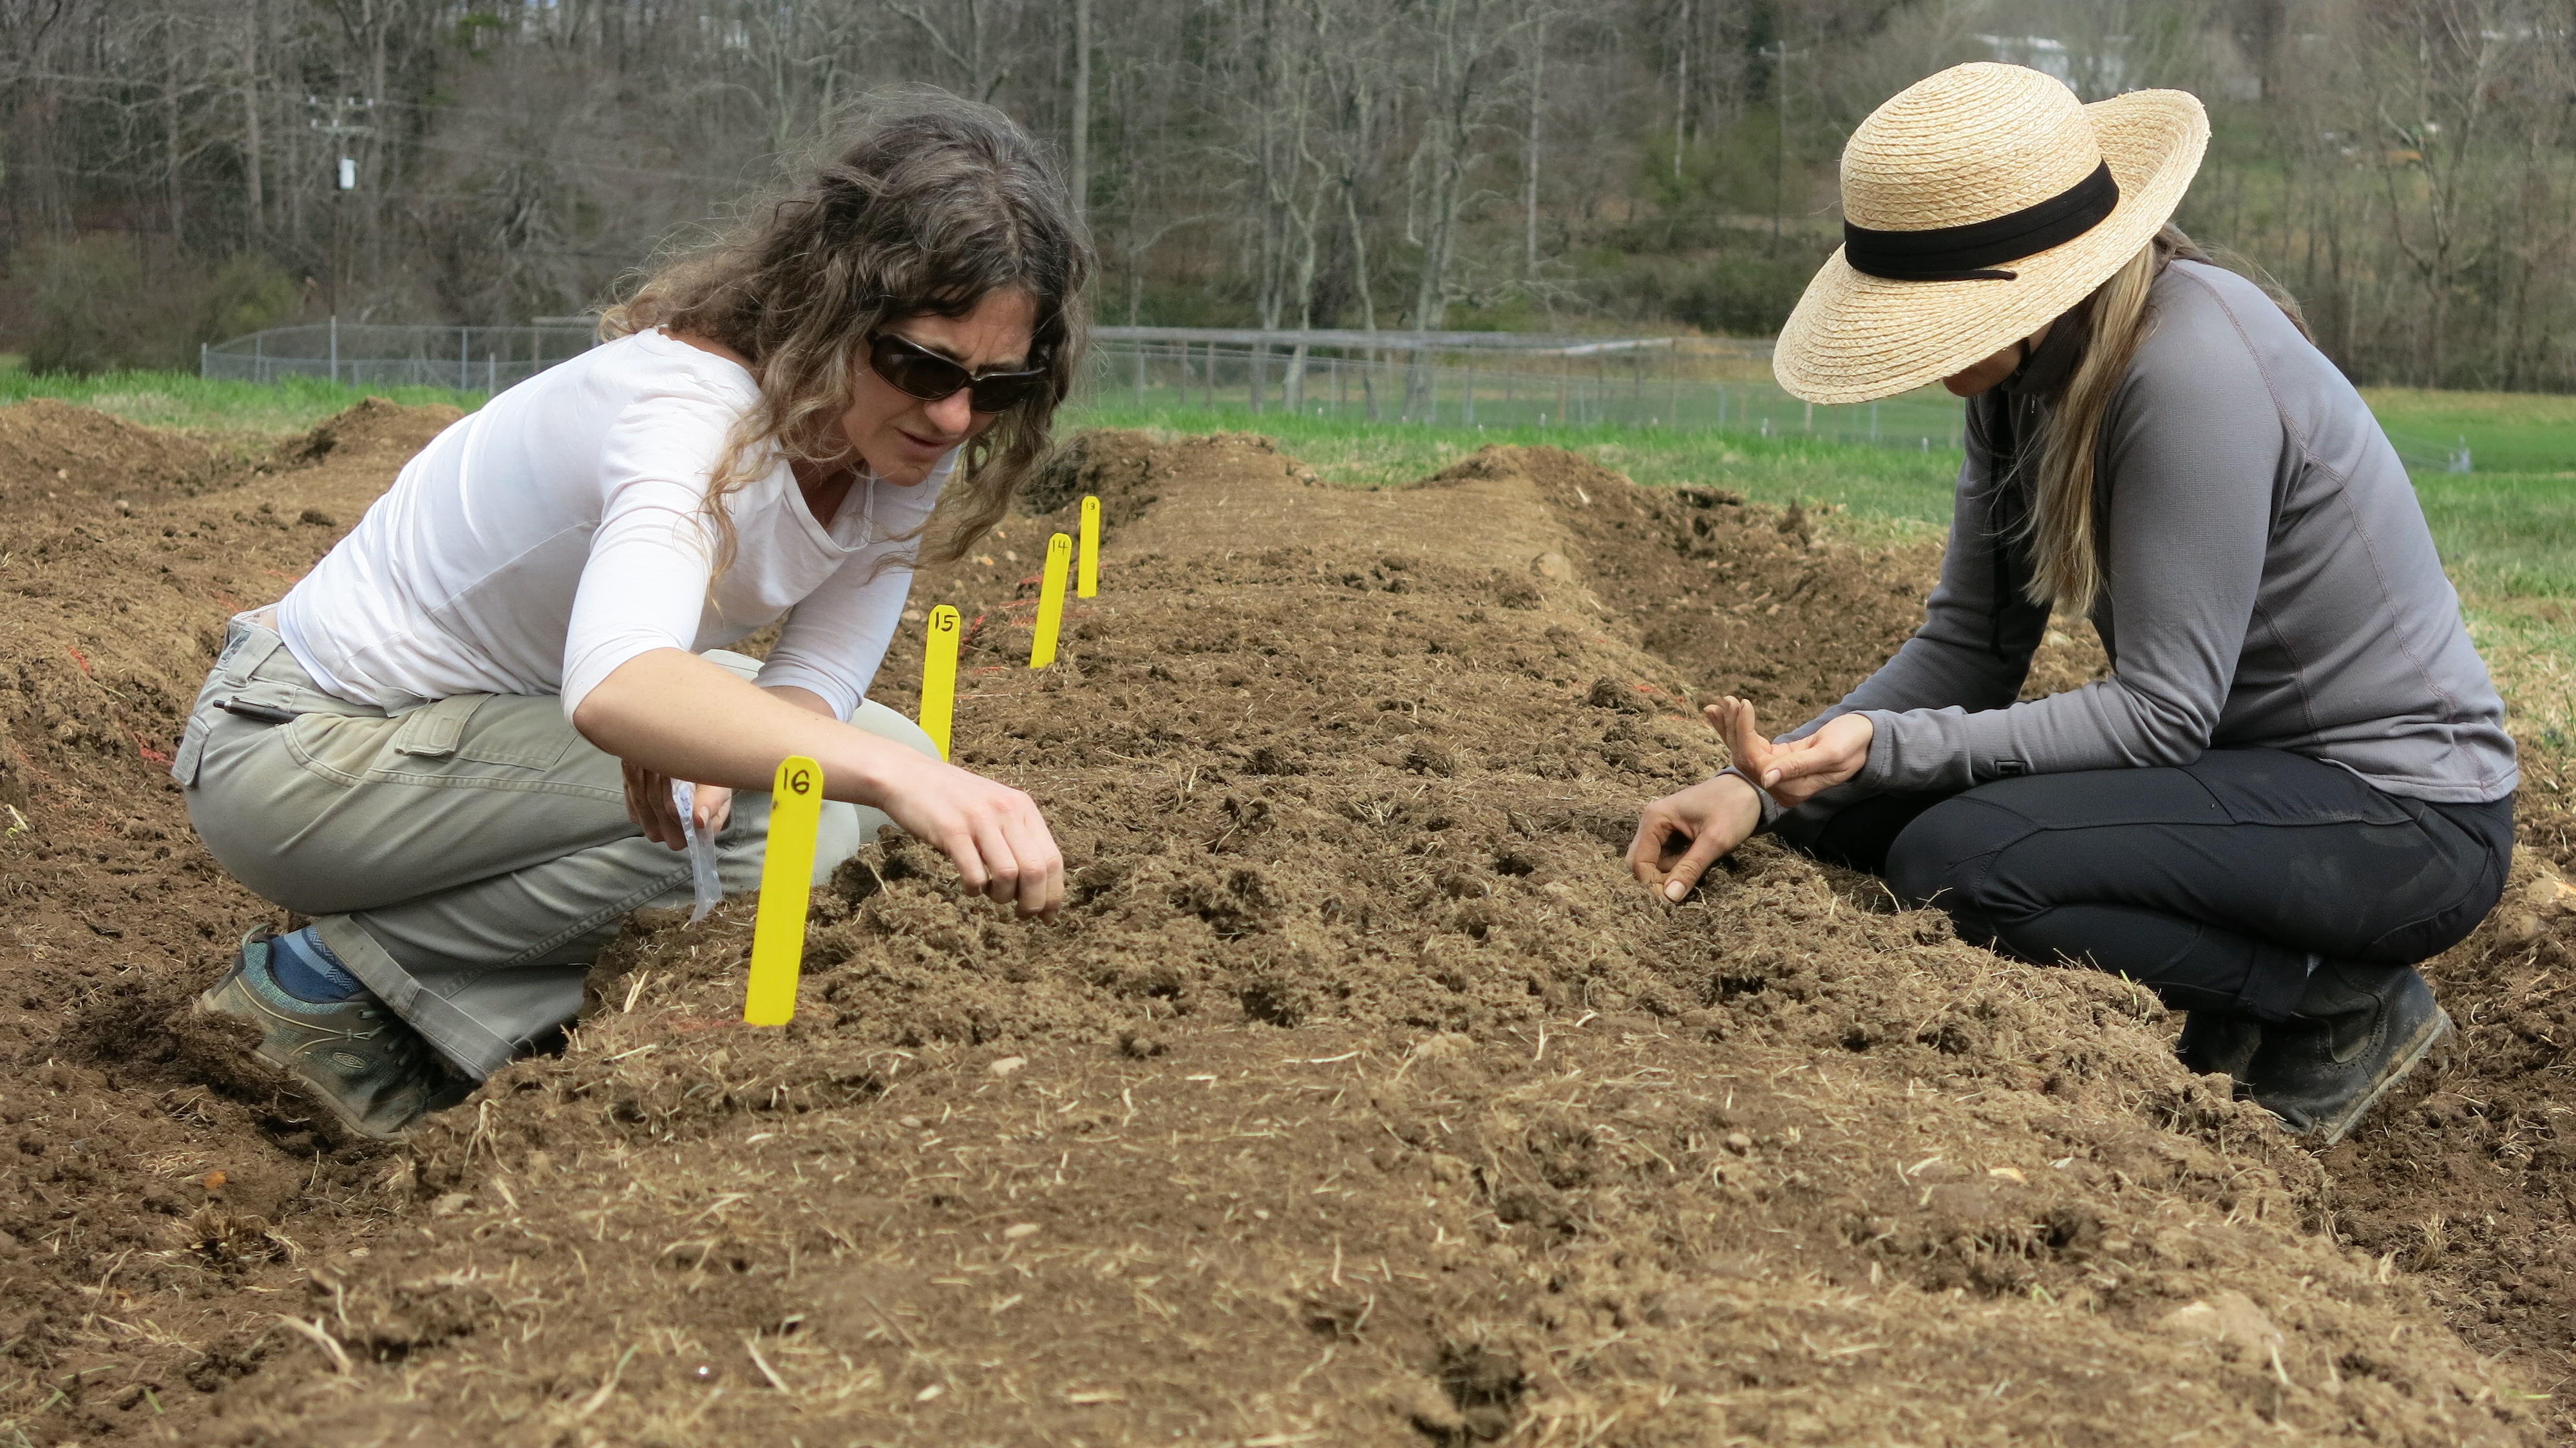 Planting the radish trial by hand image